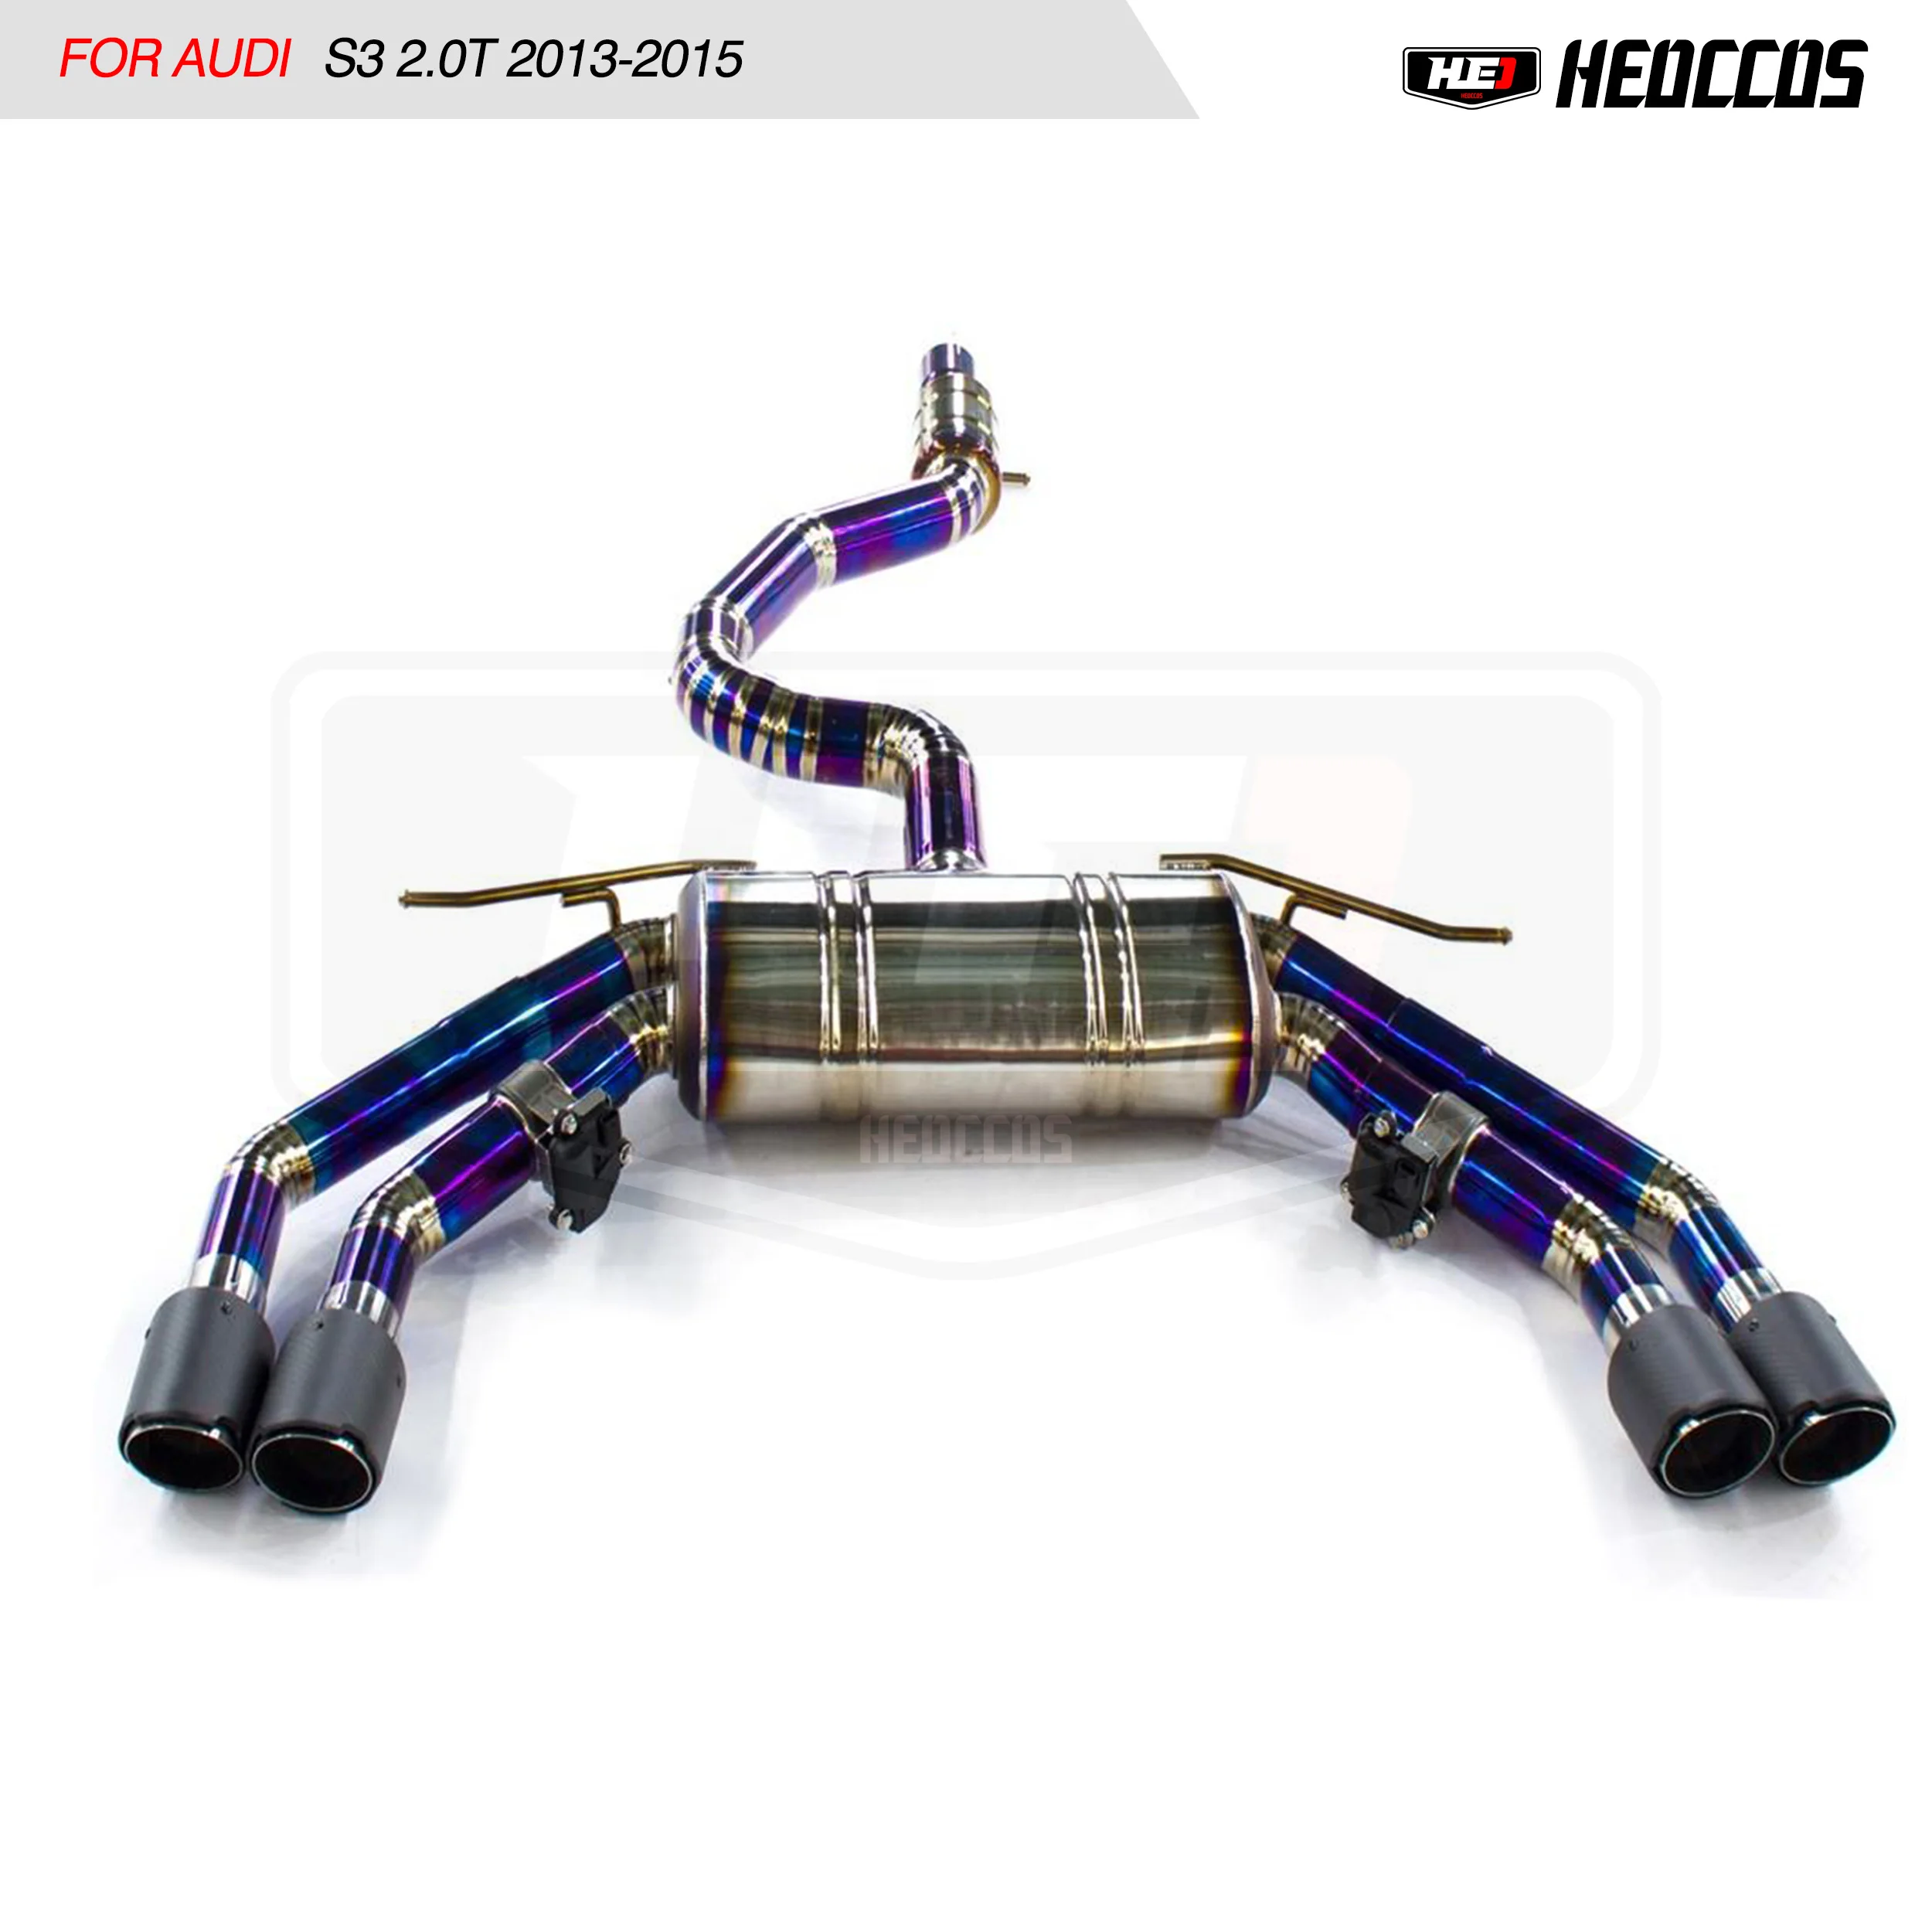 

HEO For Audi S3 2.0T 2013-2015 Titanium catback exhaust pipes exhaust tip valvetronic exhaust muffler downpipe